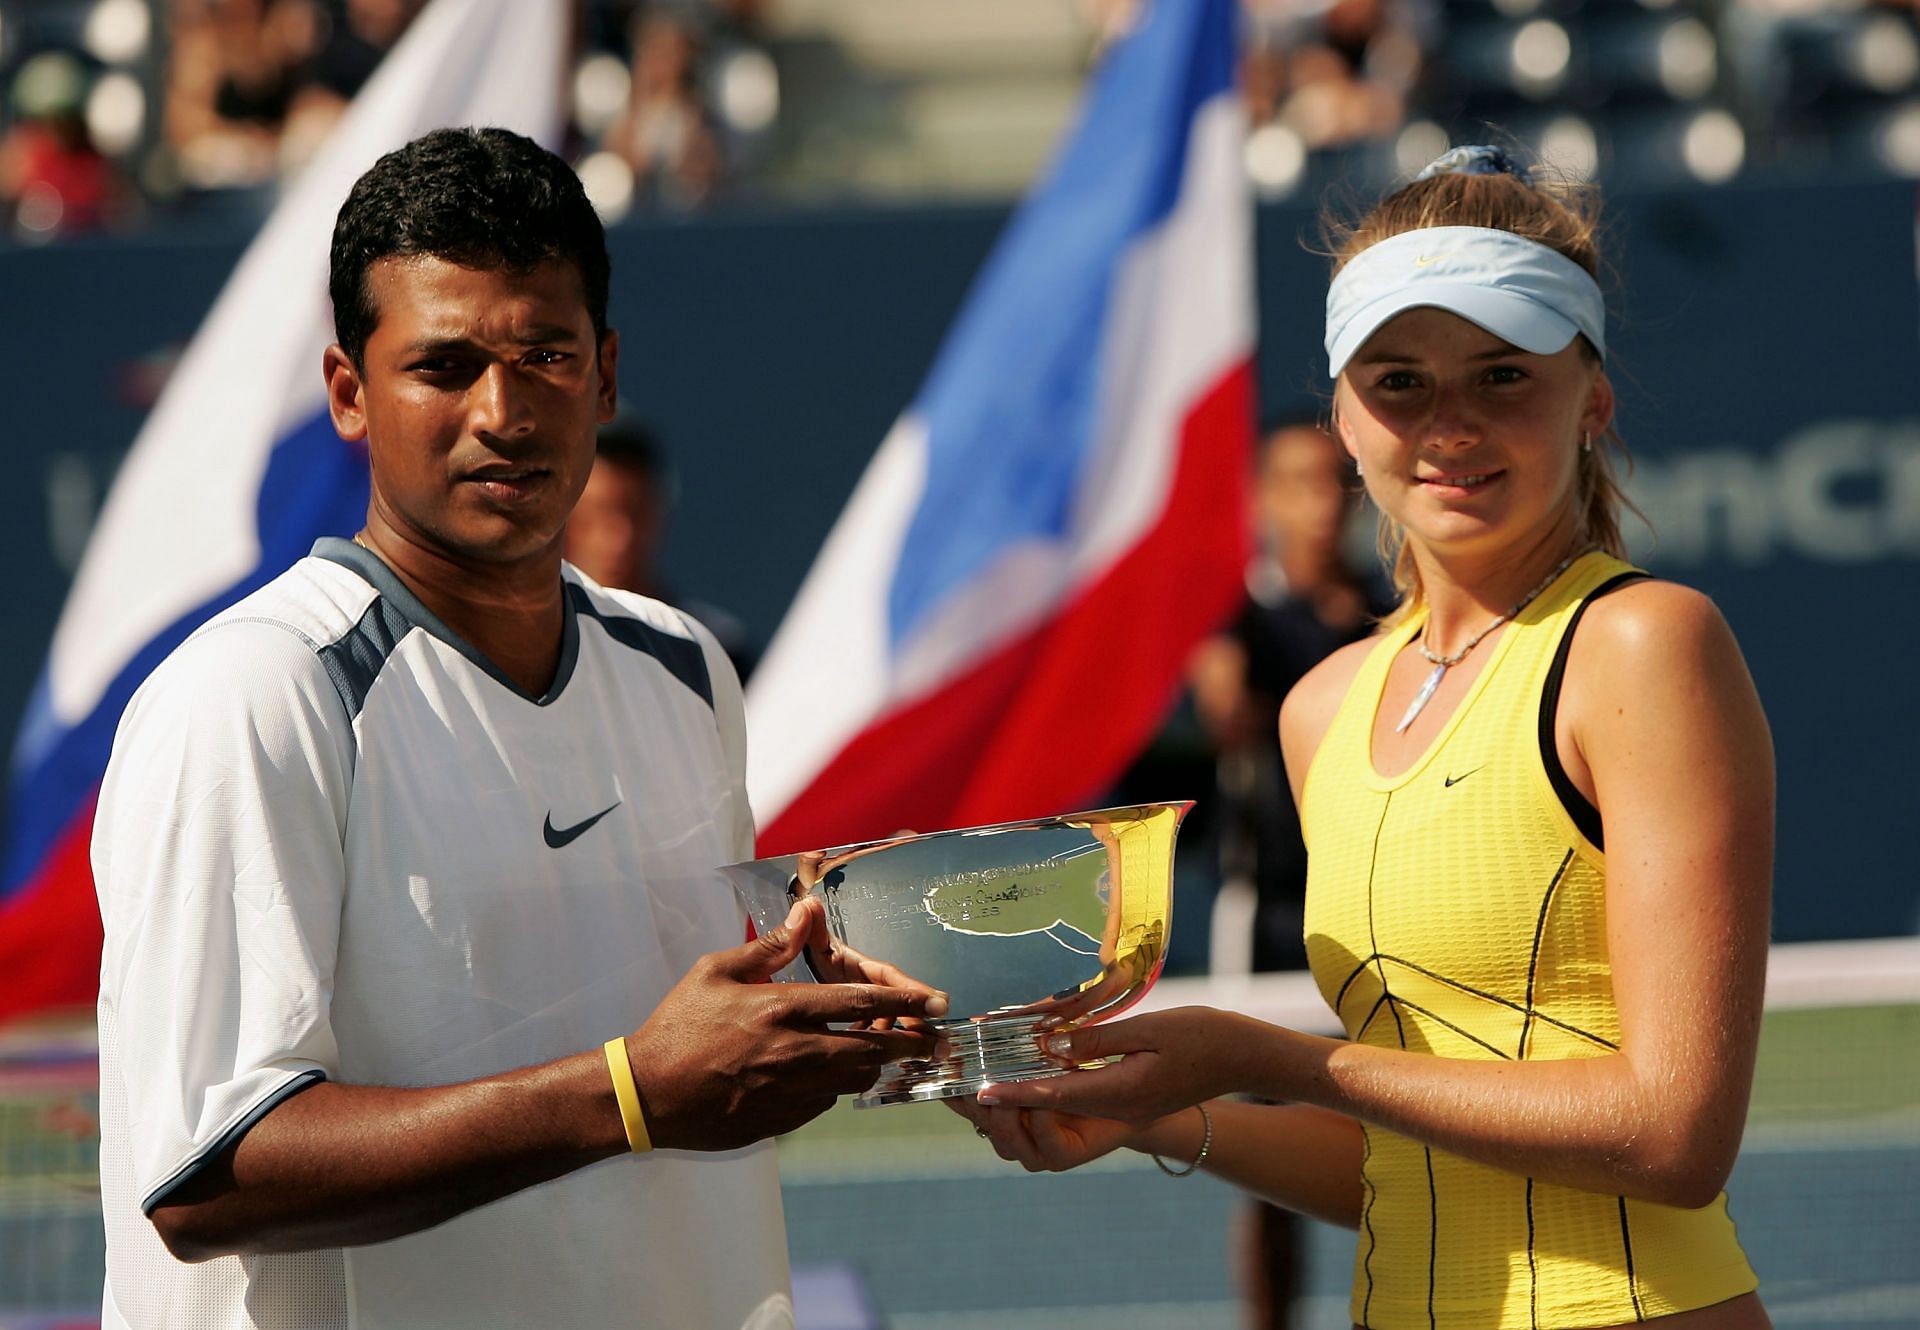 Daniela Hantuchova and Mahesh Bhupathi with the 2005 US Open mixed doubles trophy